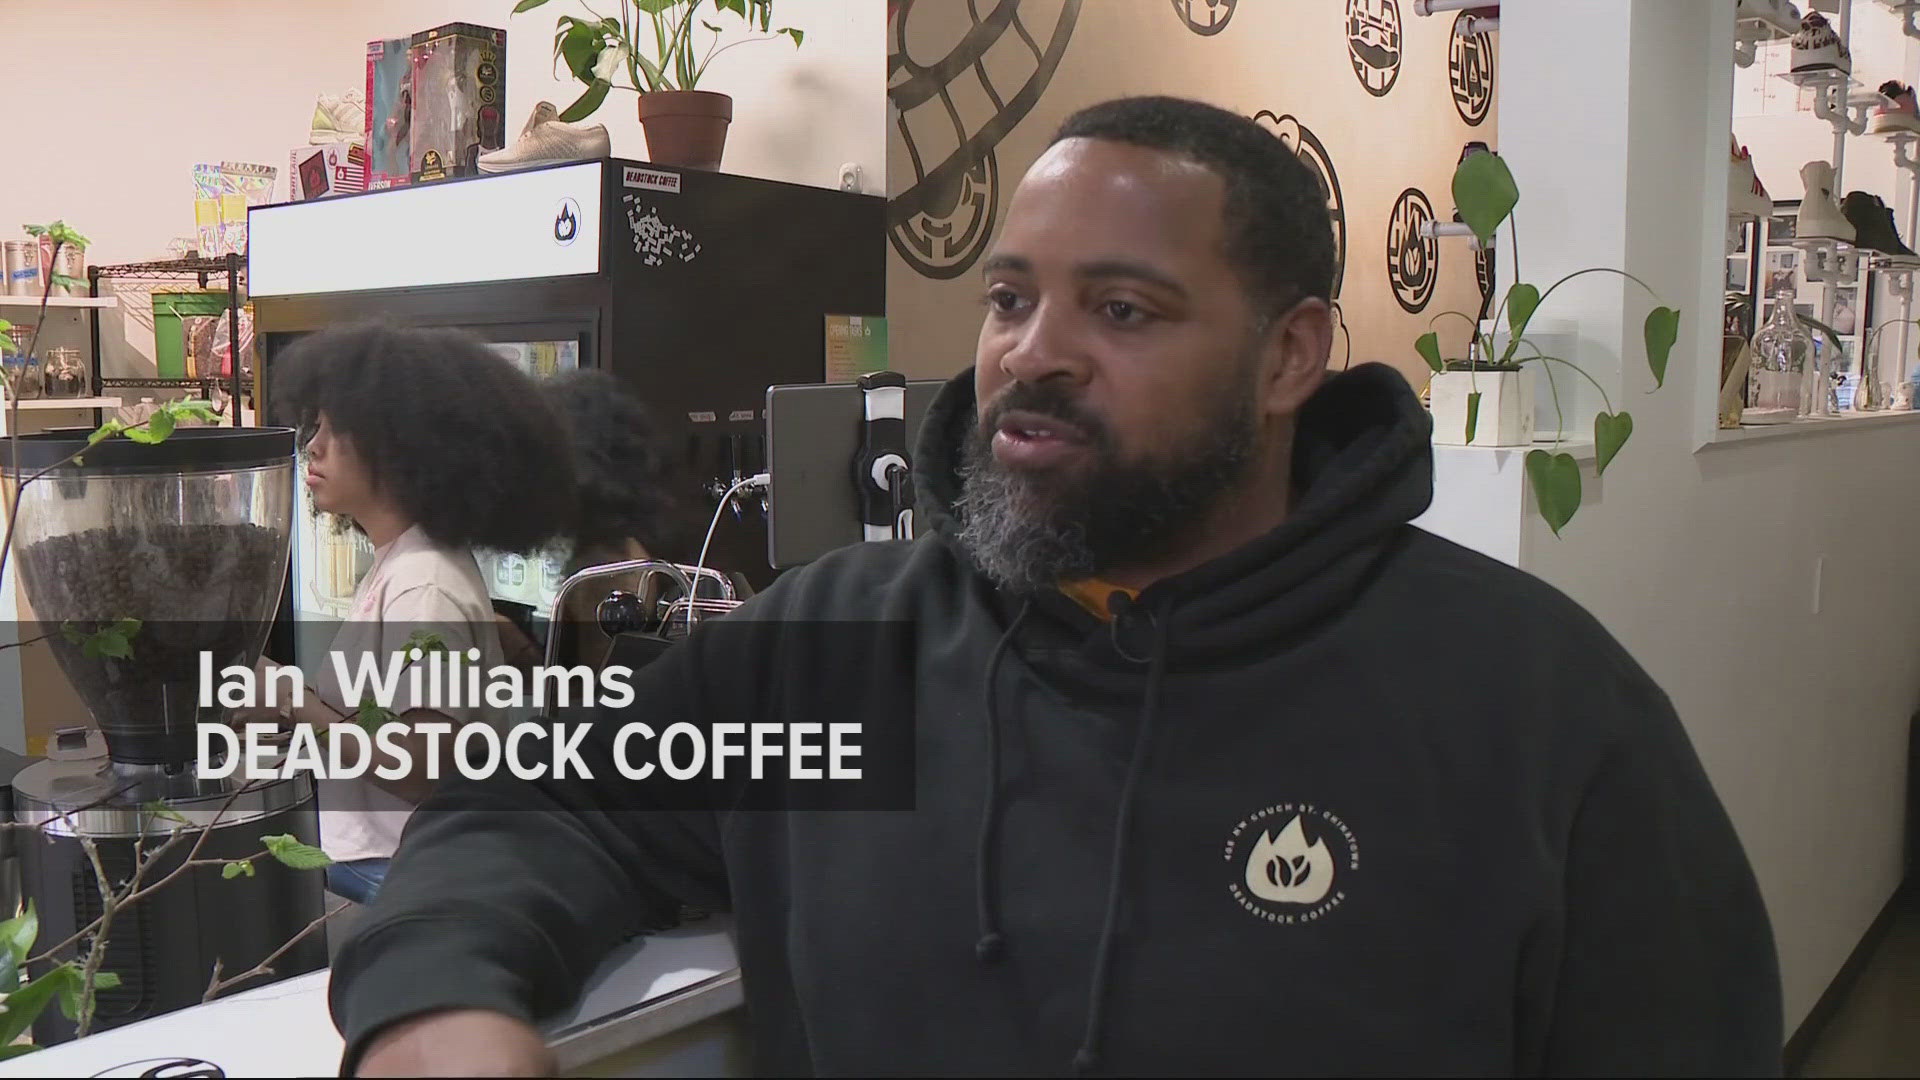 Ian Williams is the founder and owner of Deadstock Coffee, the sneaker-themed coffee shop. He'll be speaking about the community at TEDx Portland on April 27th.